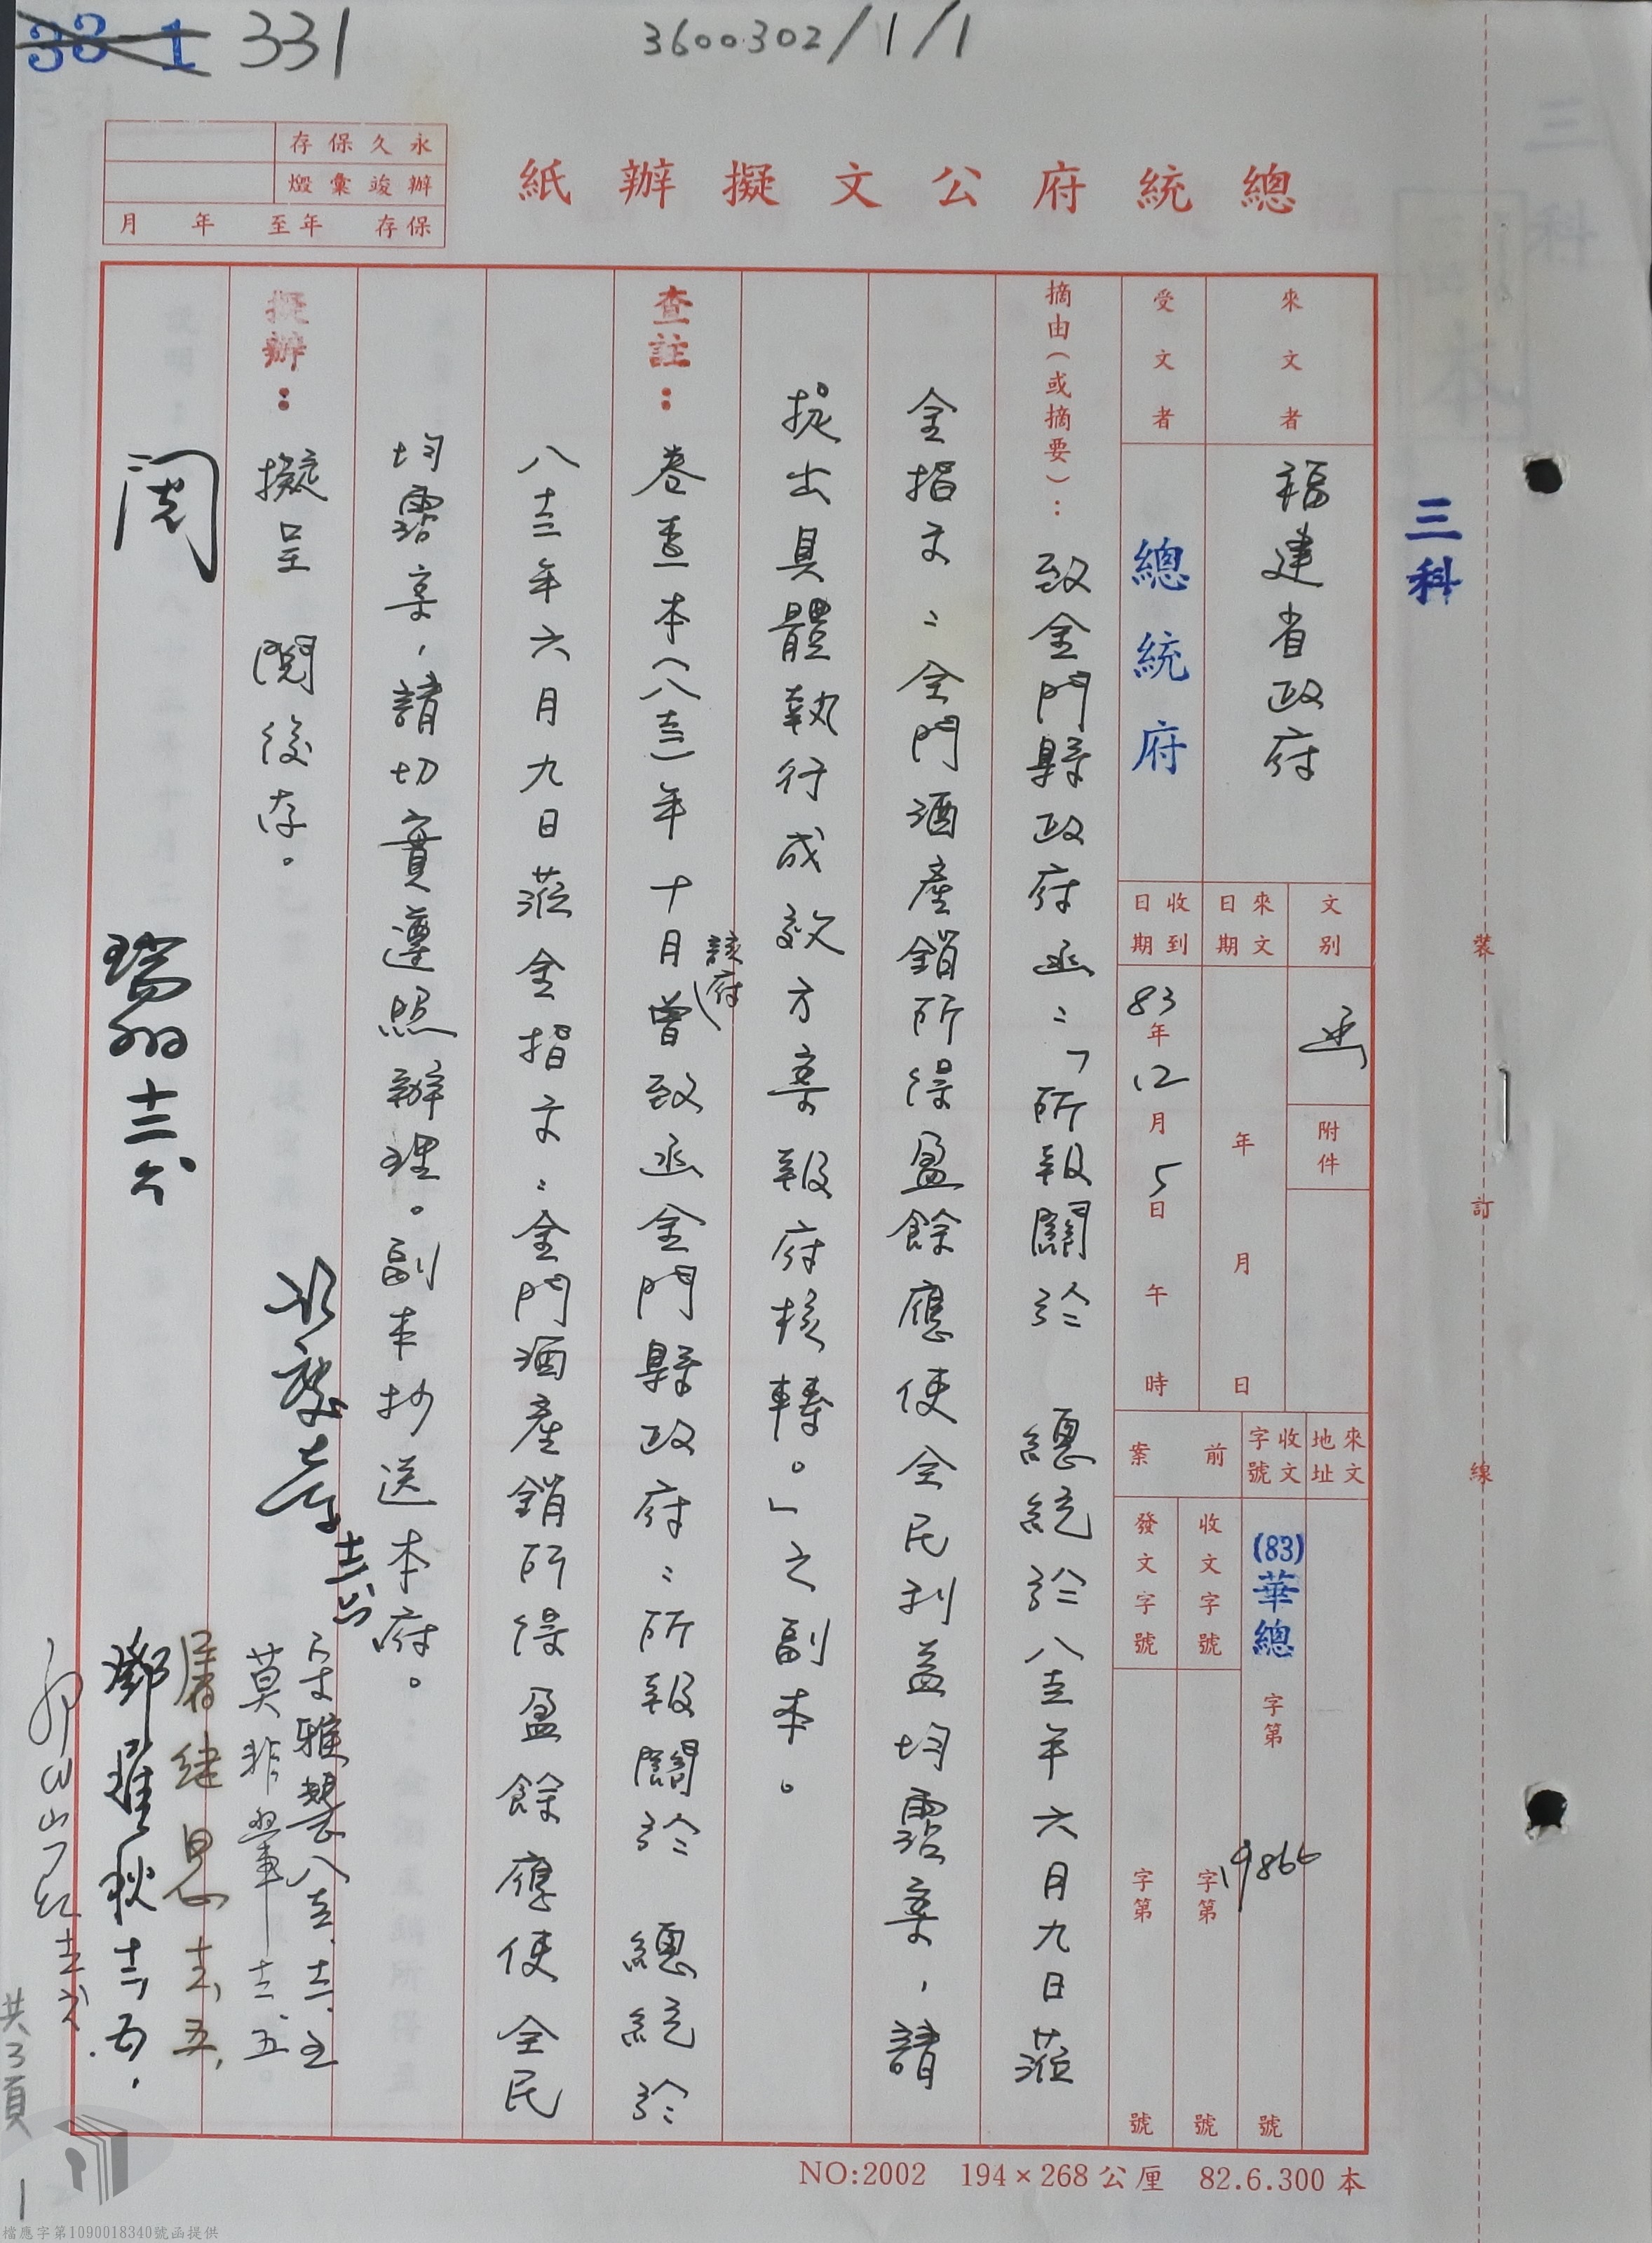 In June 1996, after President Lee Teng-hui visited Kinmen, he instructed that the surplus from the sale of Kaoliang liquor produced by Kinmen Kaoliang Liquor Inc. should be used for the benefit of the county residents.